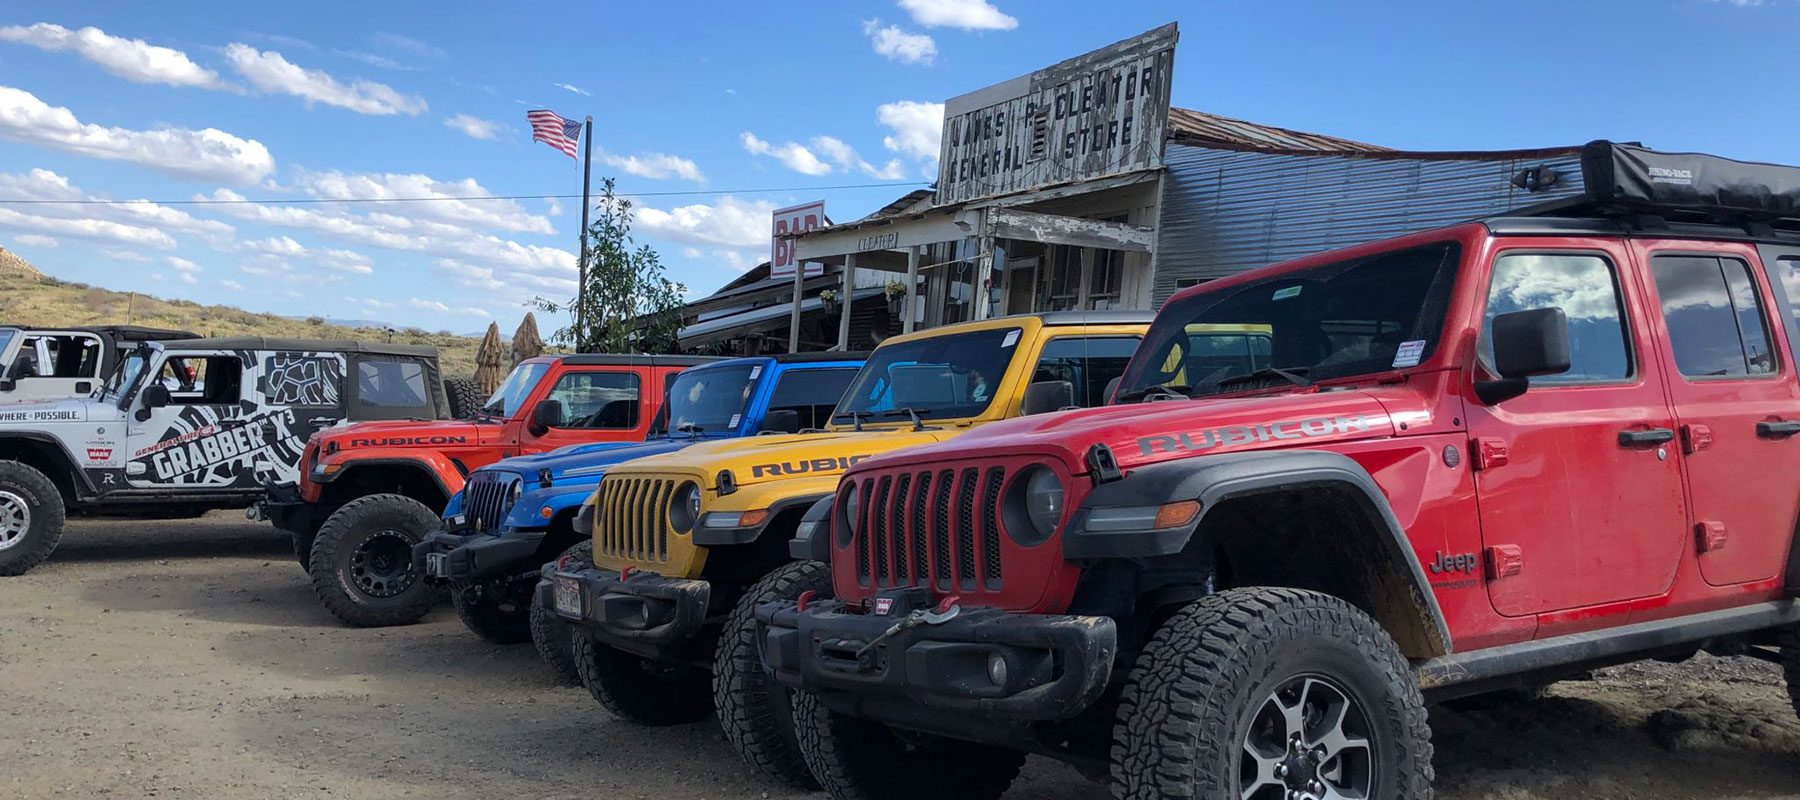 jeeps lined up at table mesa